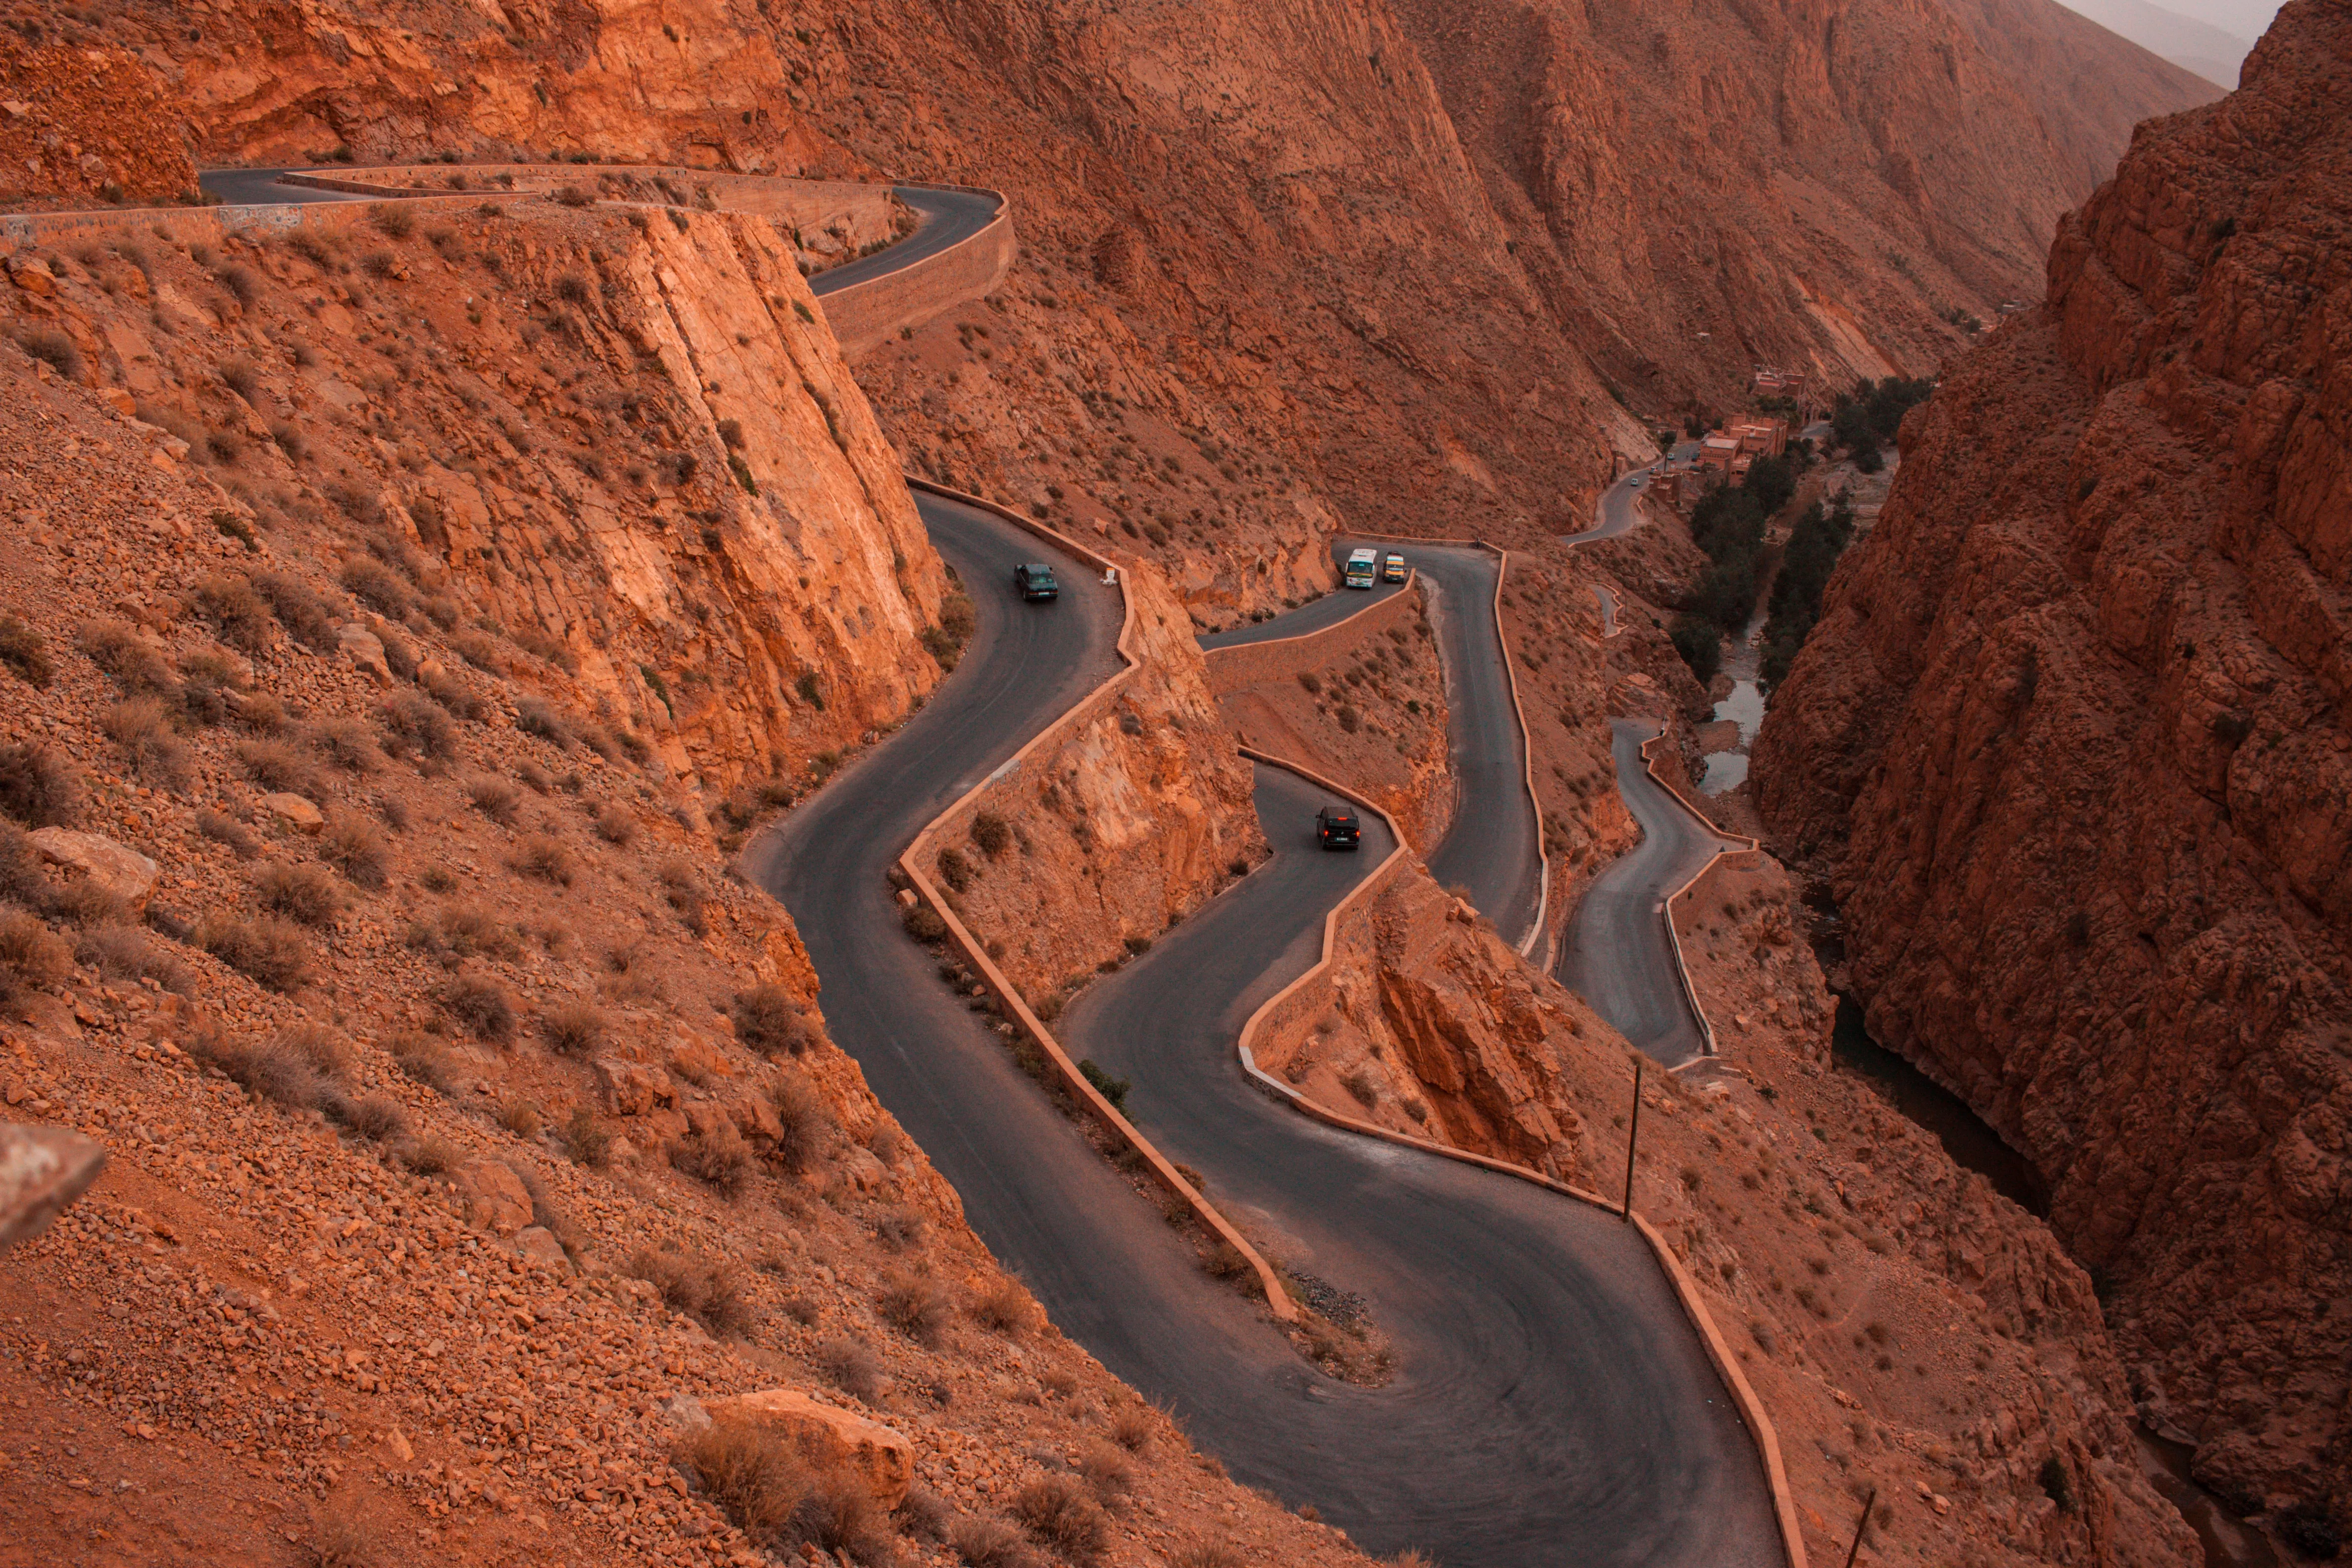 Dades Gorge and Monkey Fingers Canyon Loop in Morocco, Africa | Trekking & Hiking - Rated 0.9